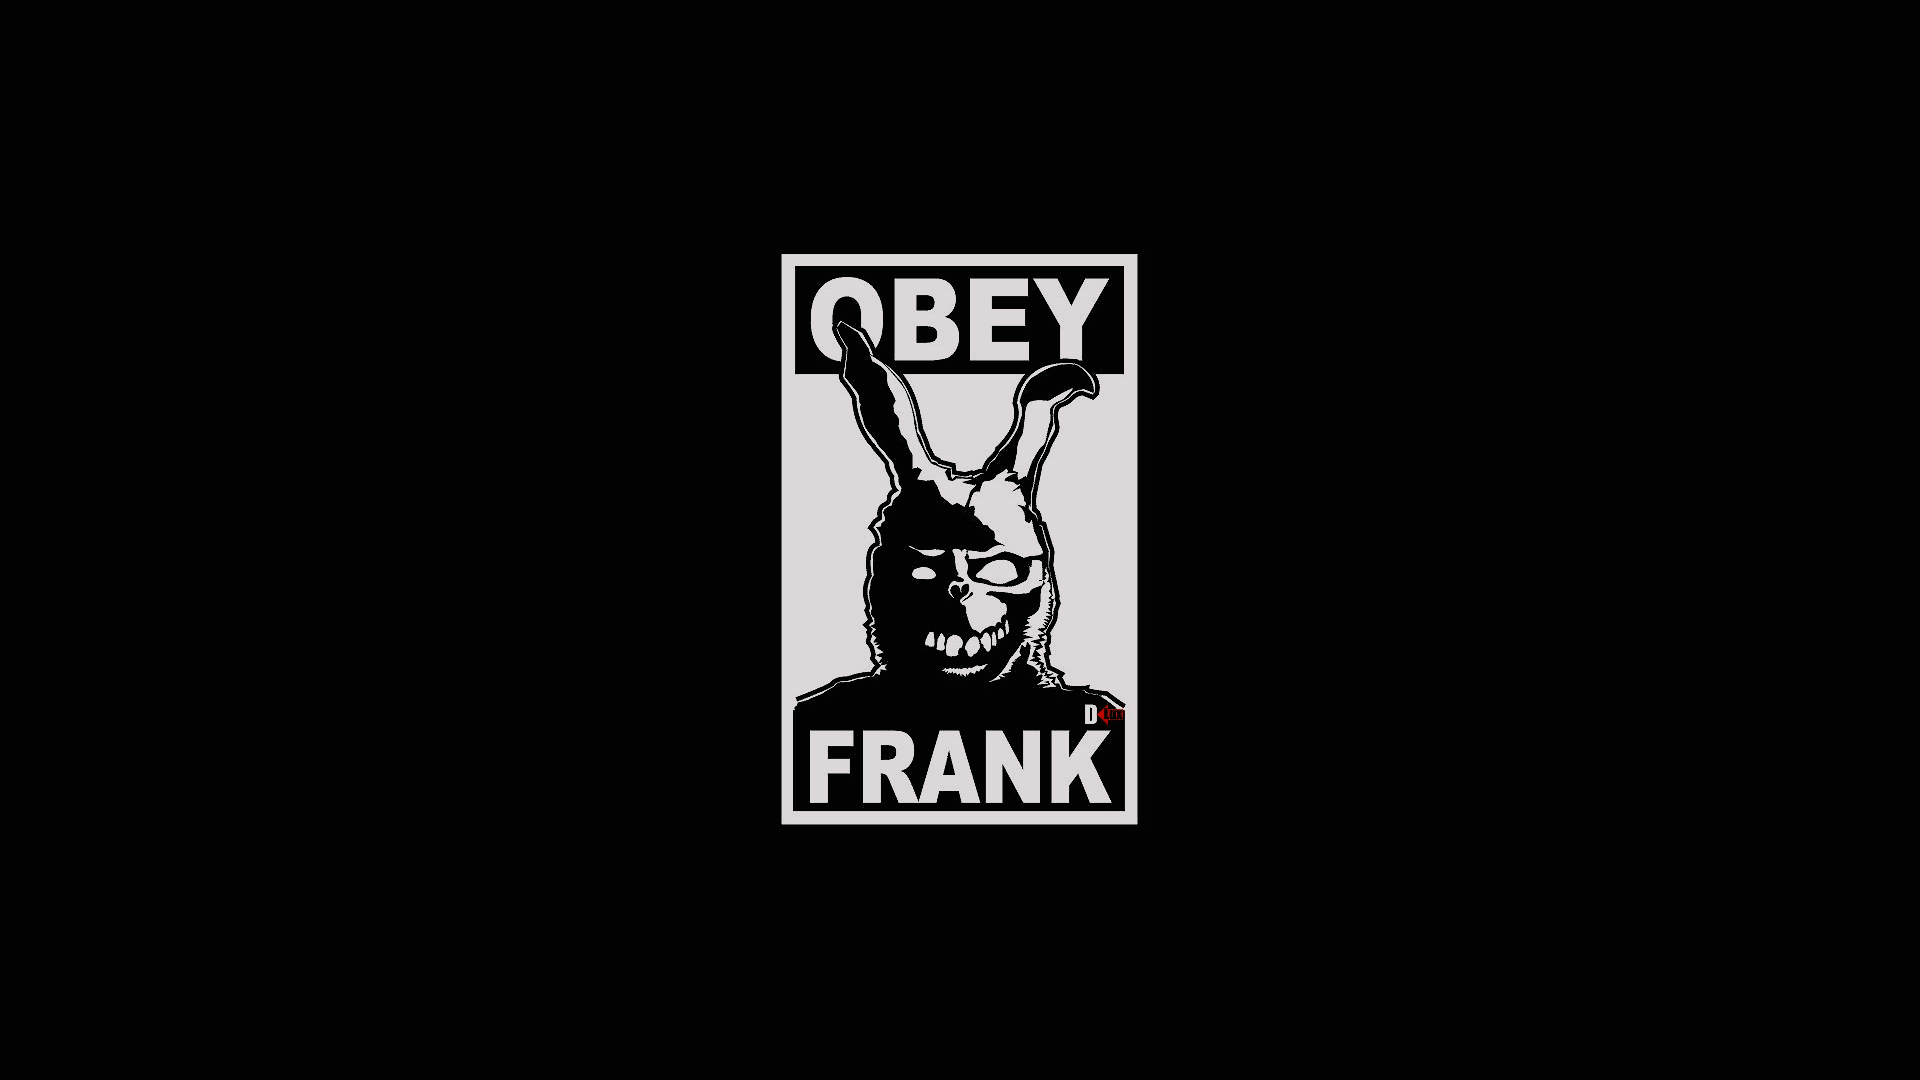 General 1920x1080 Donnie Darko minimalism poster movie poster movie characters obey 